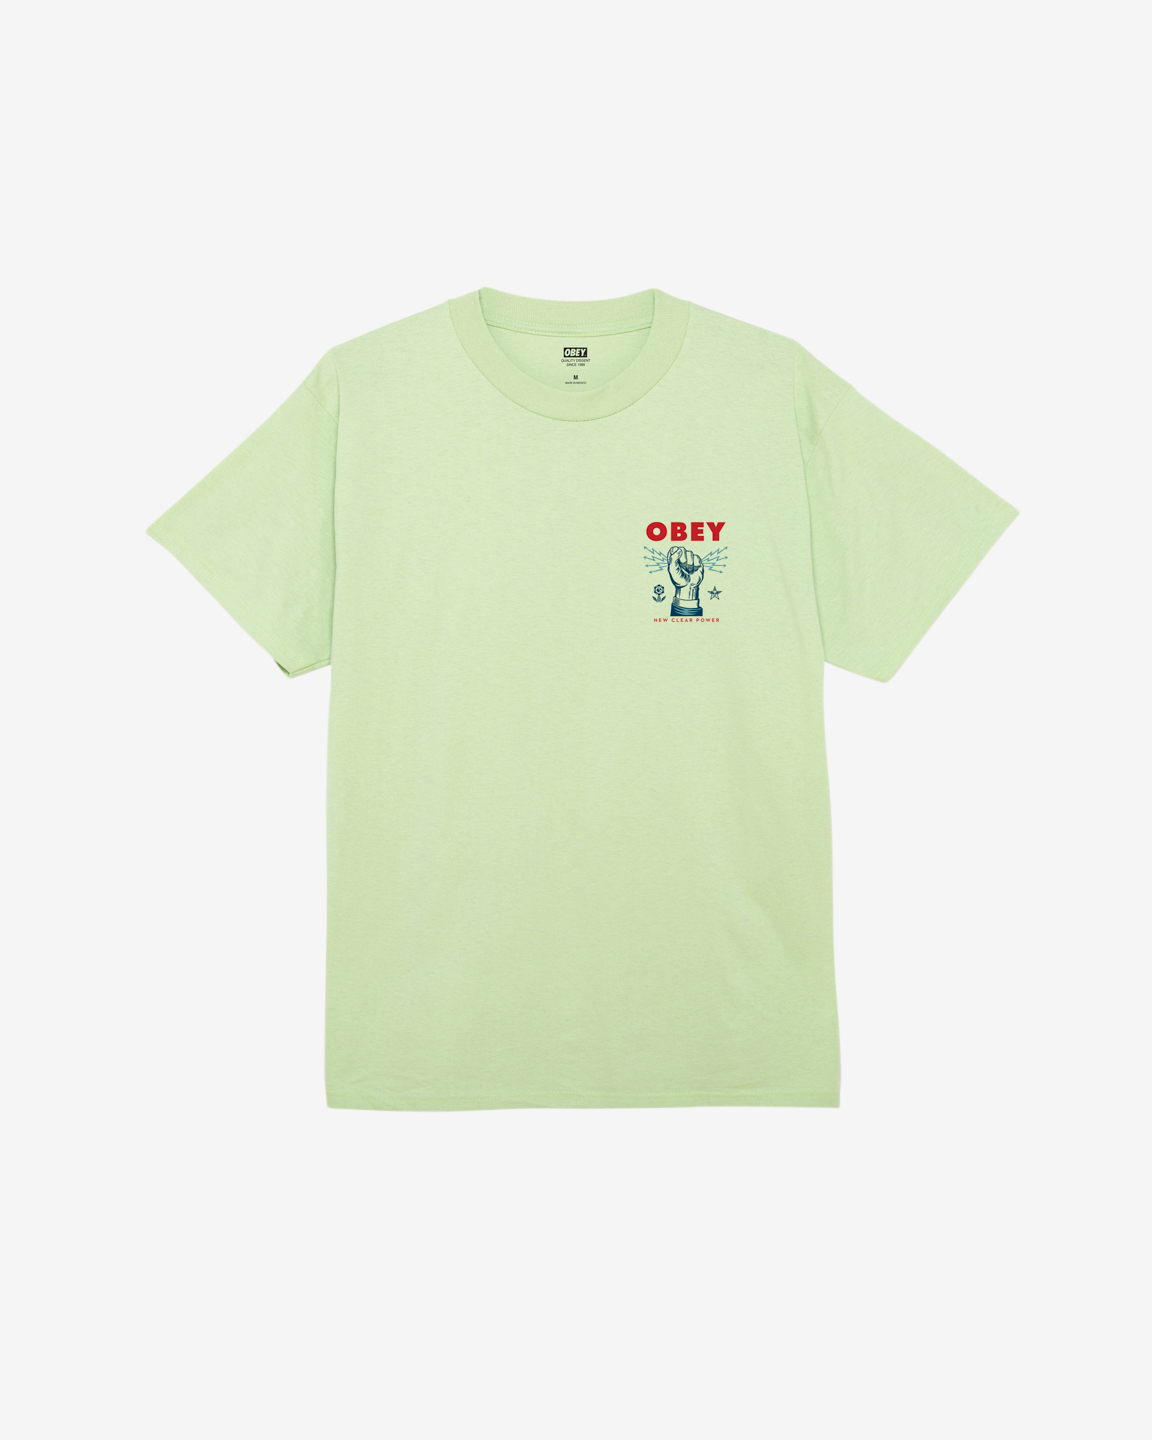 OBEY New Clear Power T-Shirt - Cucumber